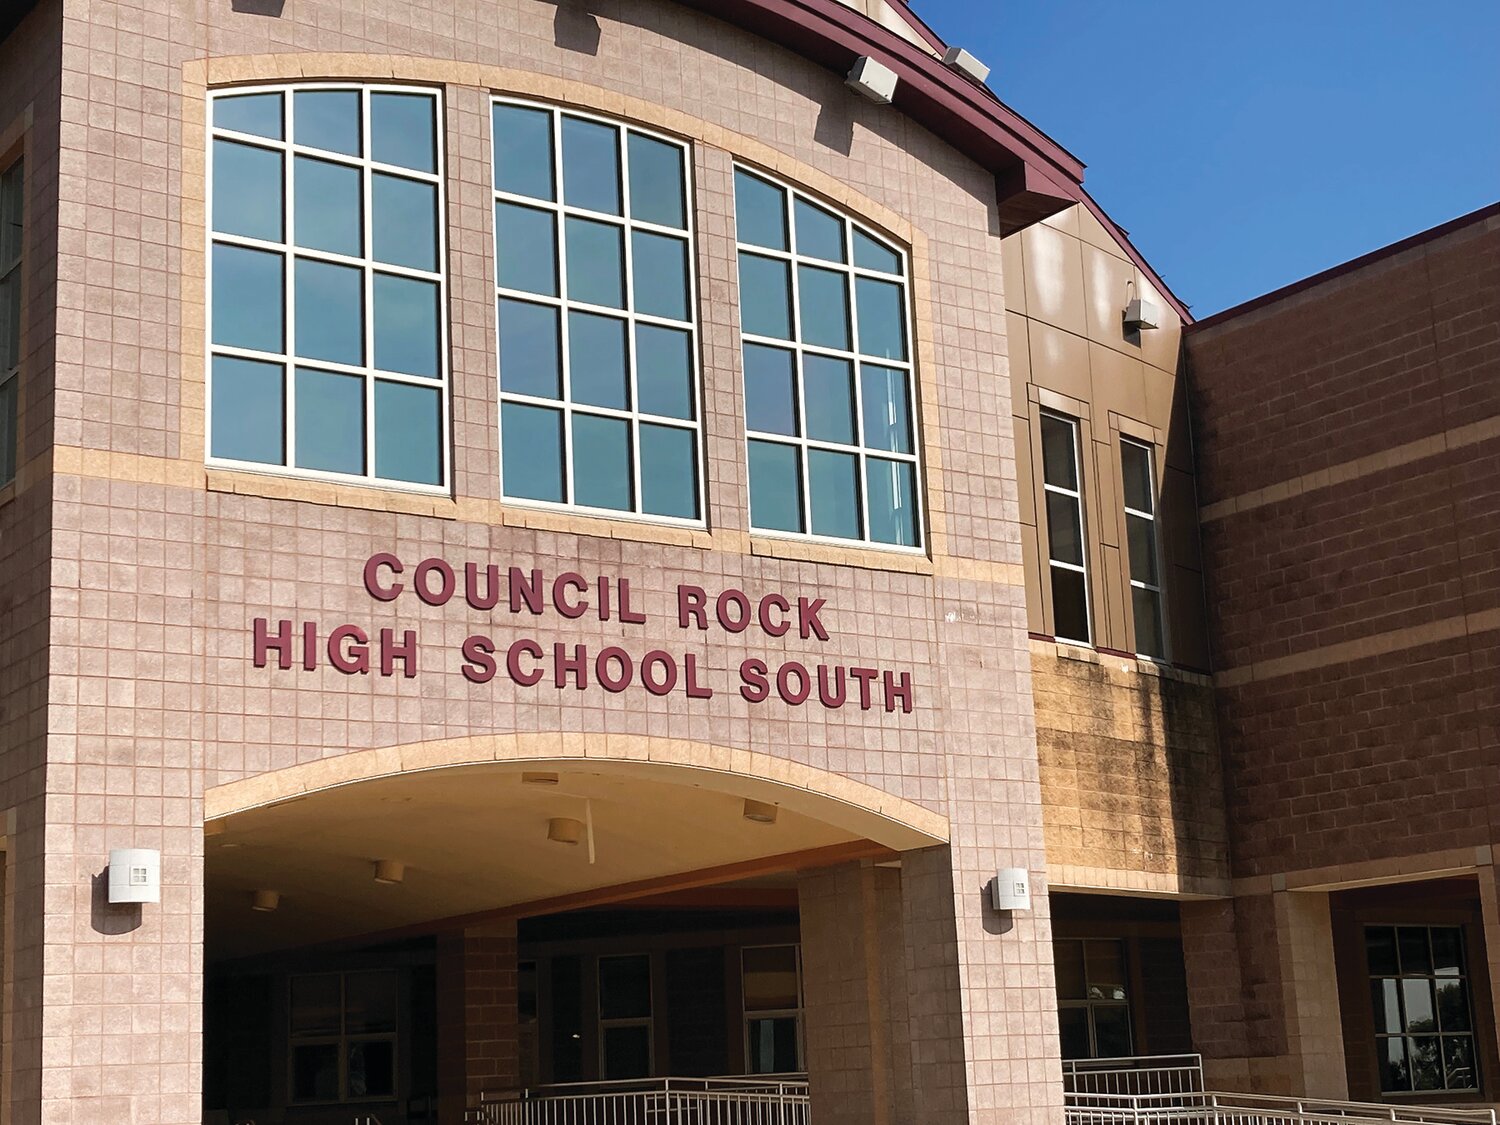 Several more improvement projects are coming soon at Council Rock High School South in Northampton.